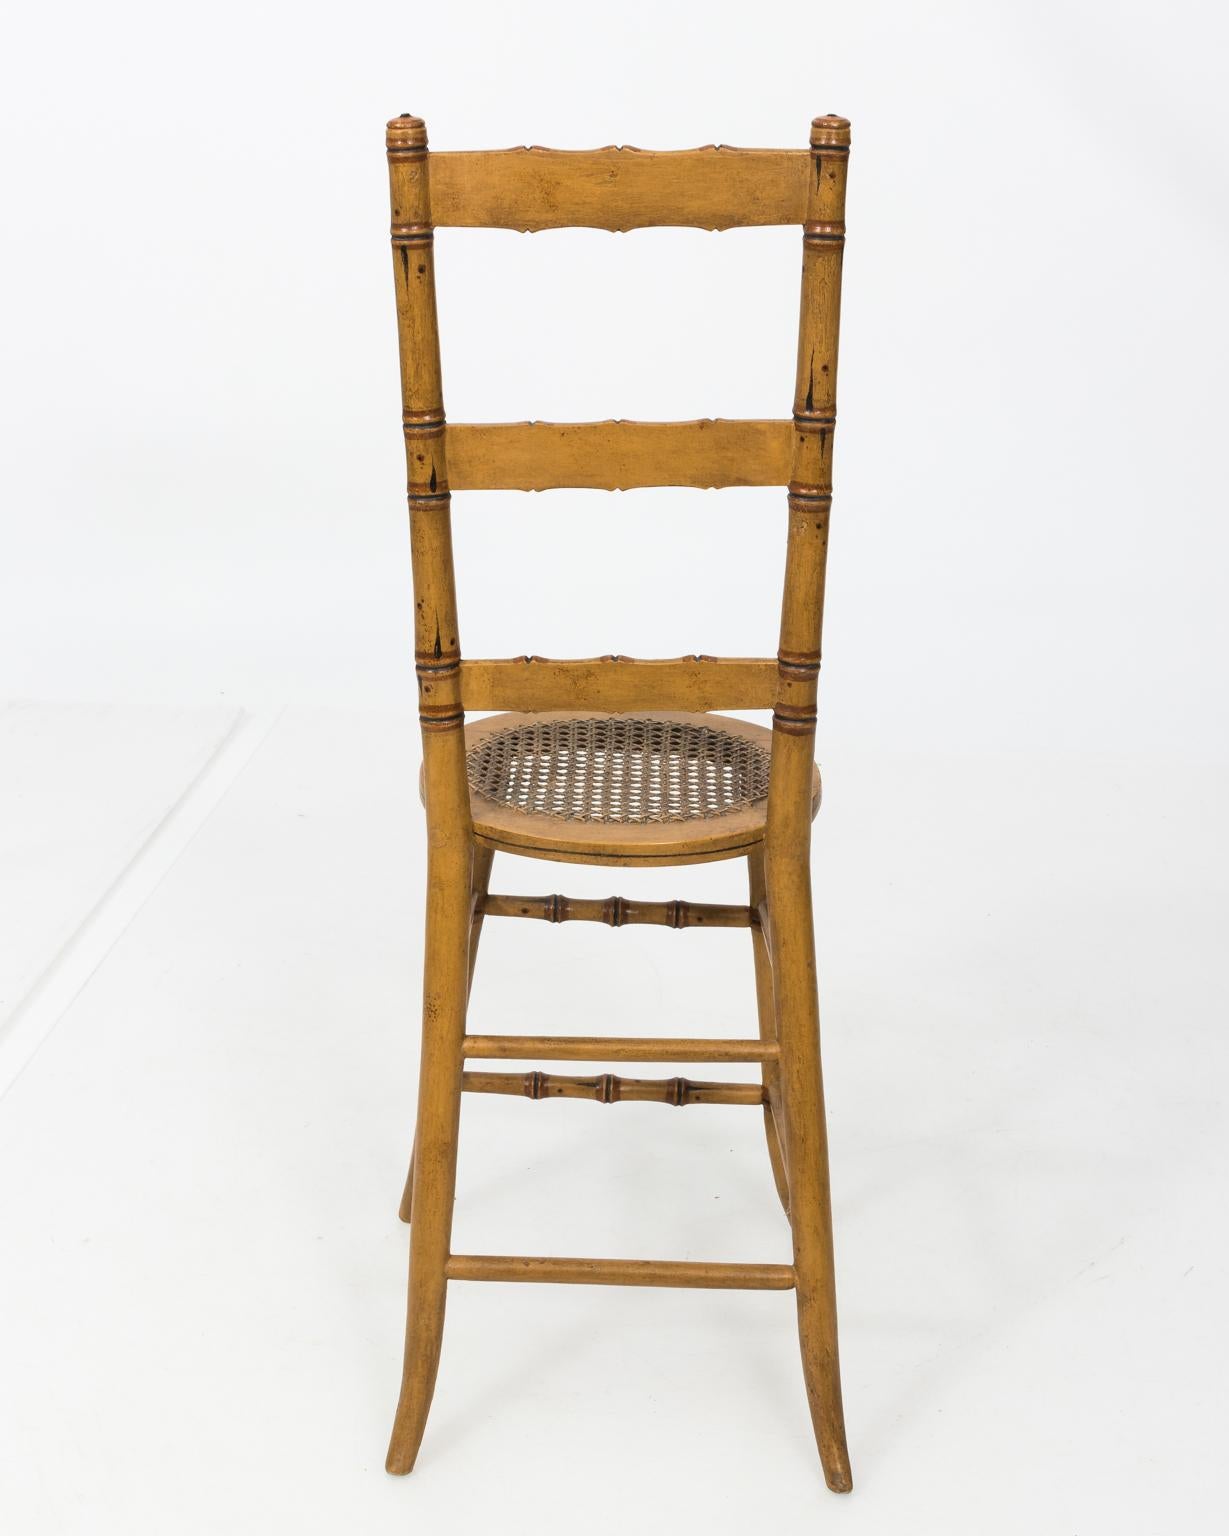 Late 19th century faux bamboo child's chair with ladder back and cane woven seat.